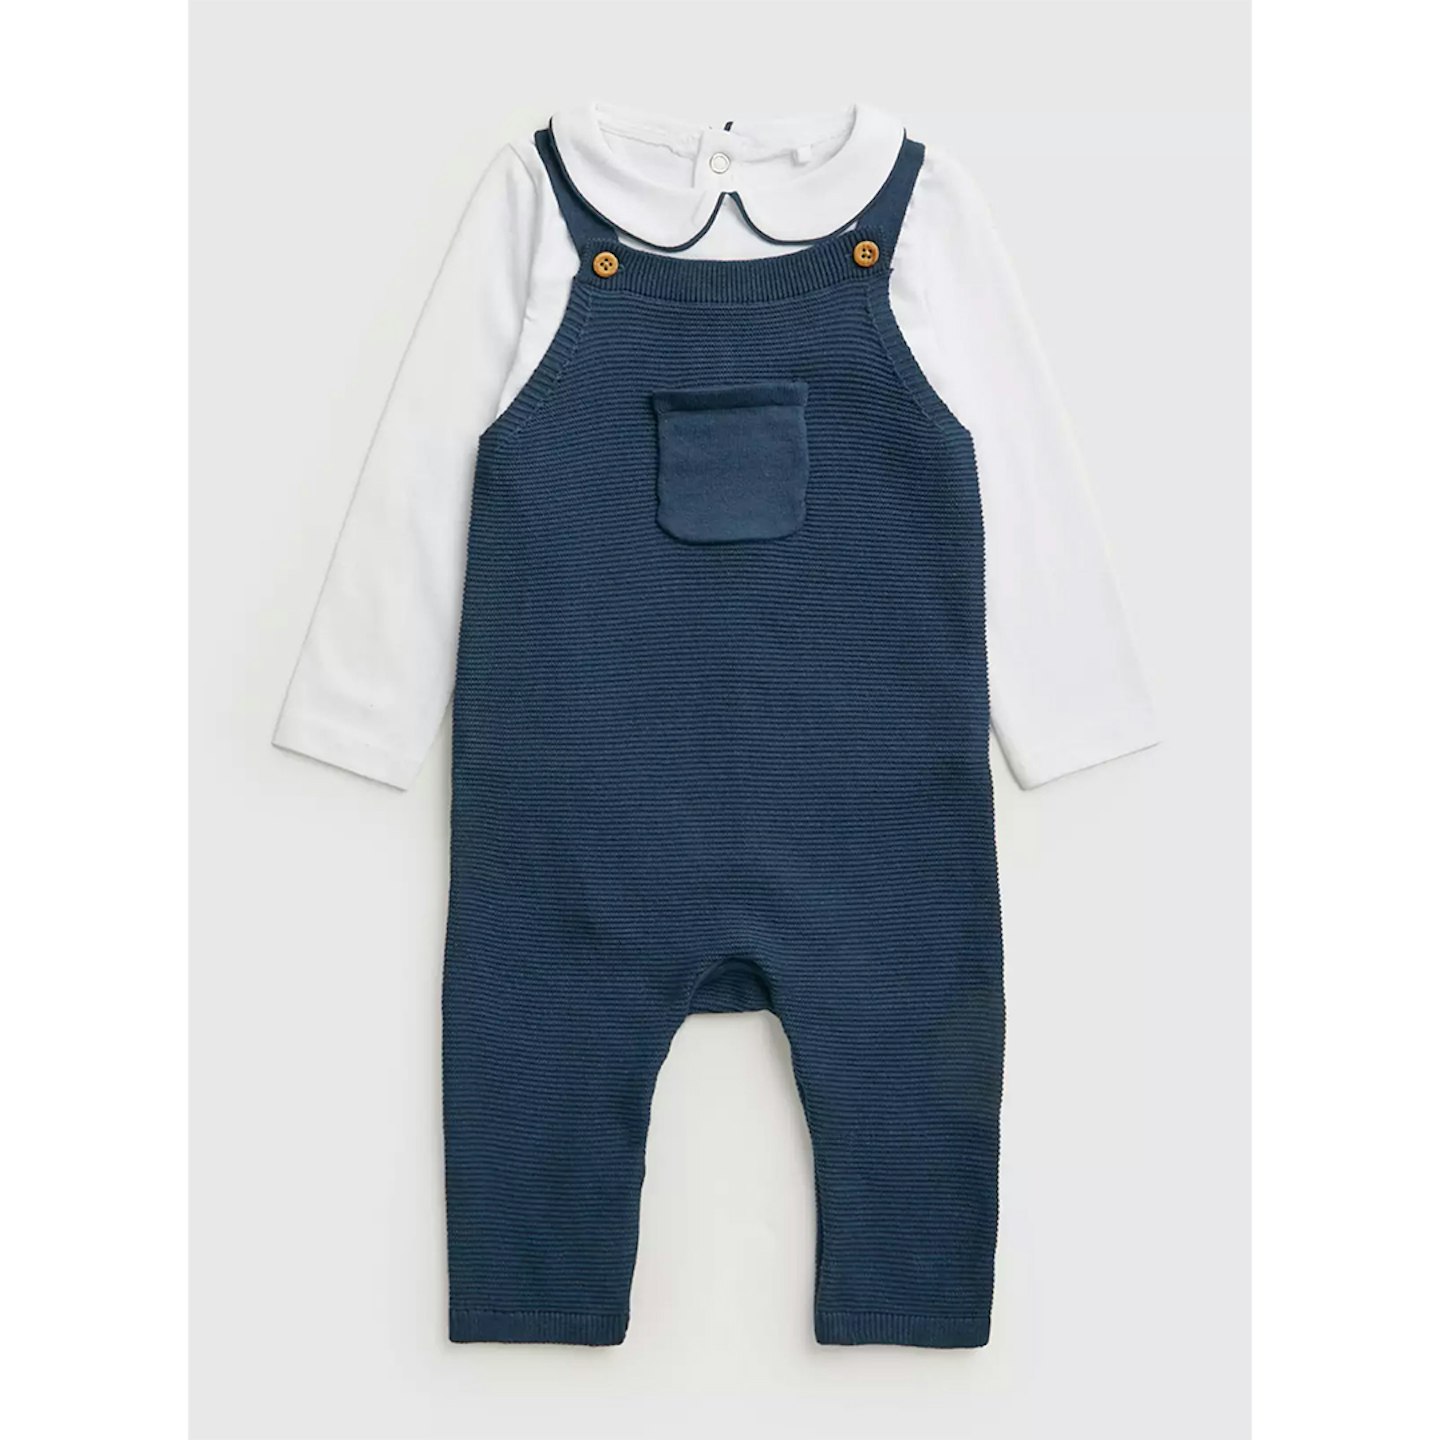 Navy Knitted Dungarees & White Bodysuit